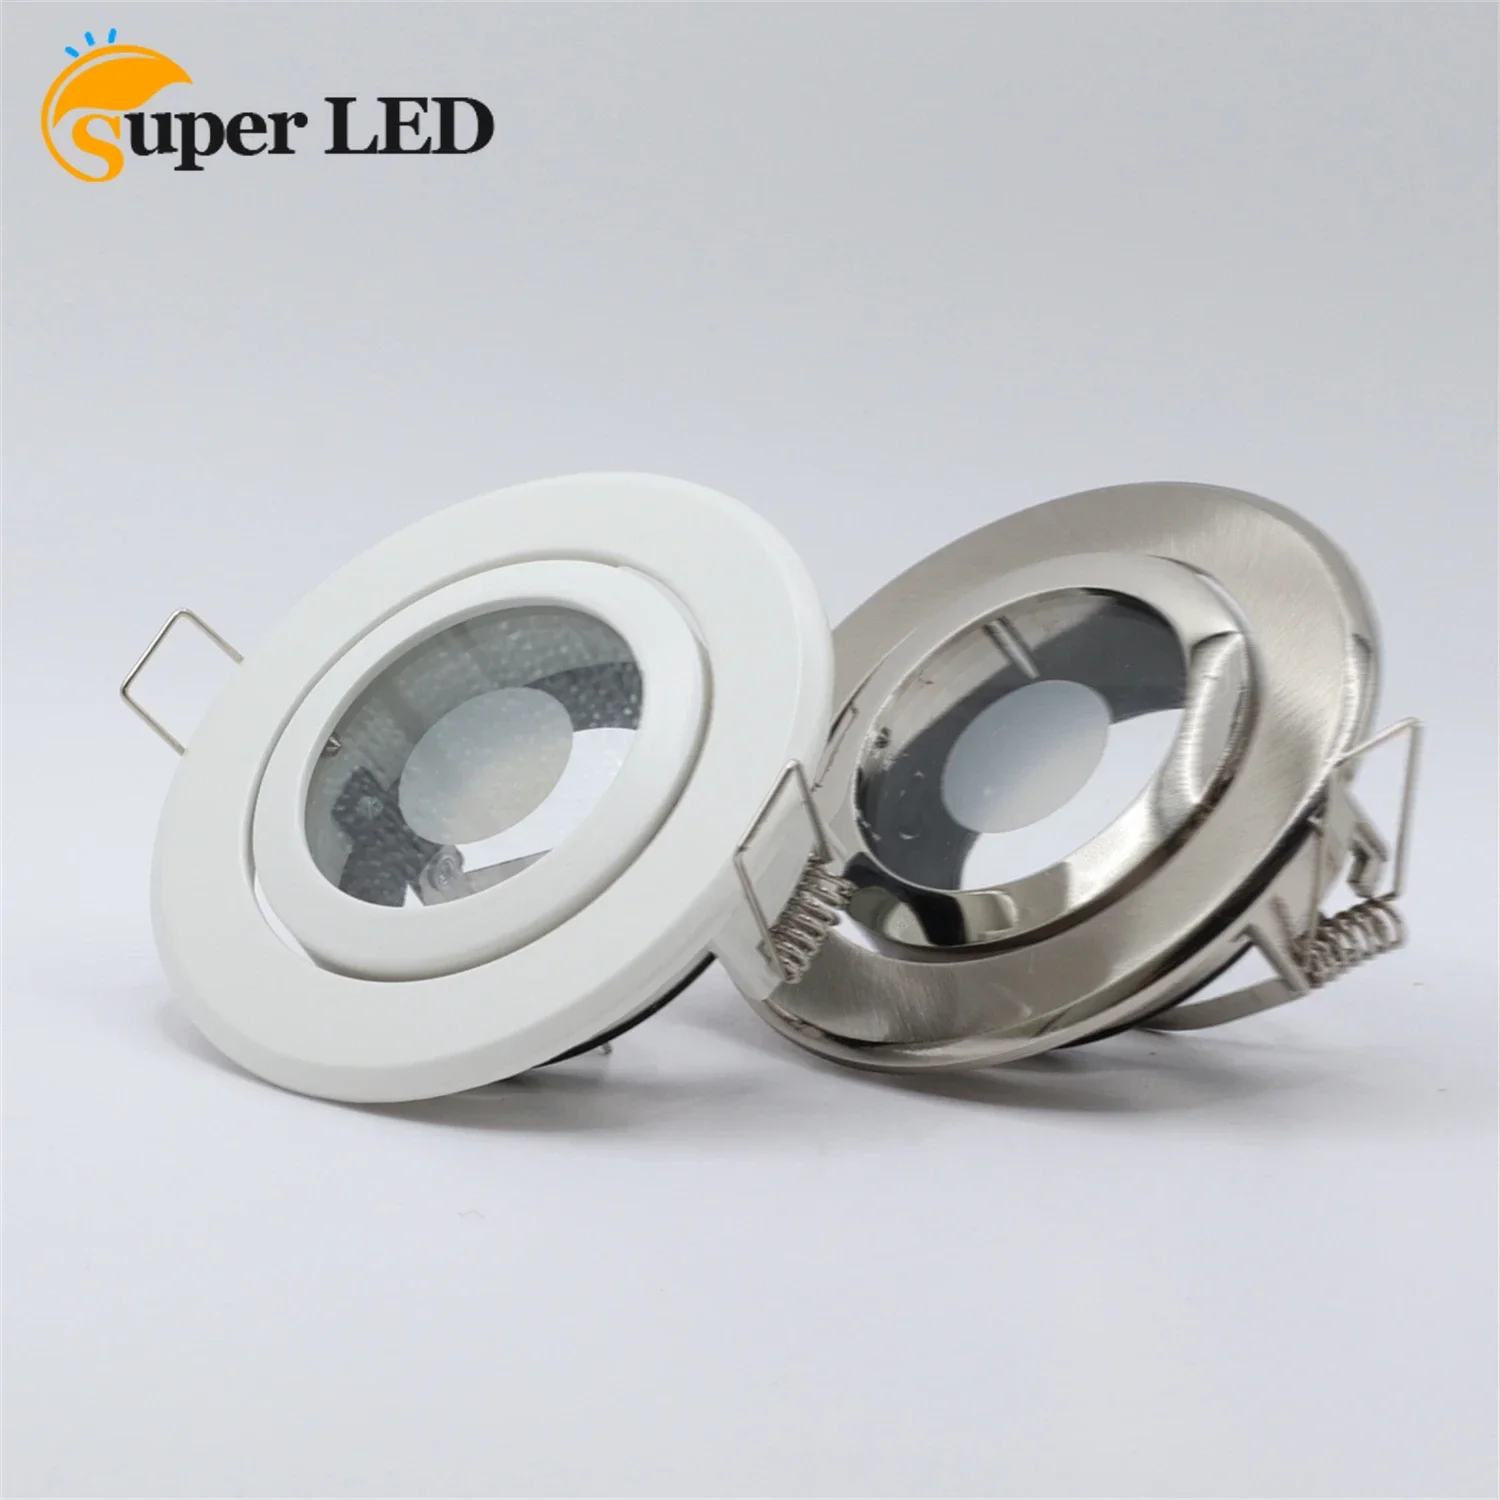 LED GU10/MR16  Downlight Recessed Ceiling Spot Light Lamp Shade recessed cct 3000k 6000k change color temperature led cob downlight 85 265v ceiling lamp spot light 12w 15w 18w 24w with drive